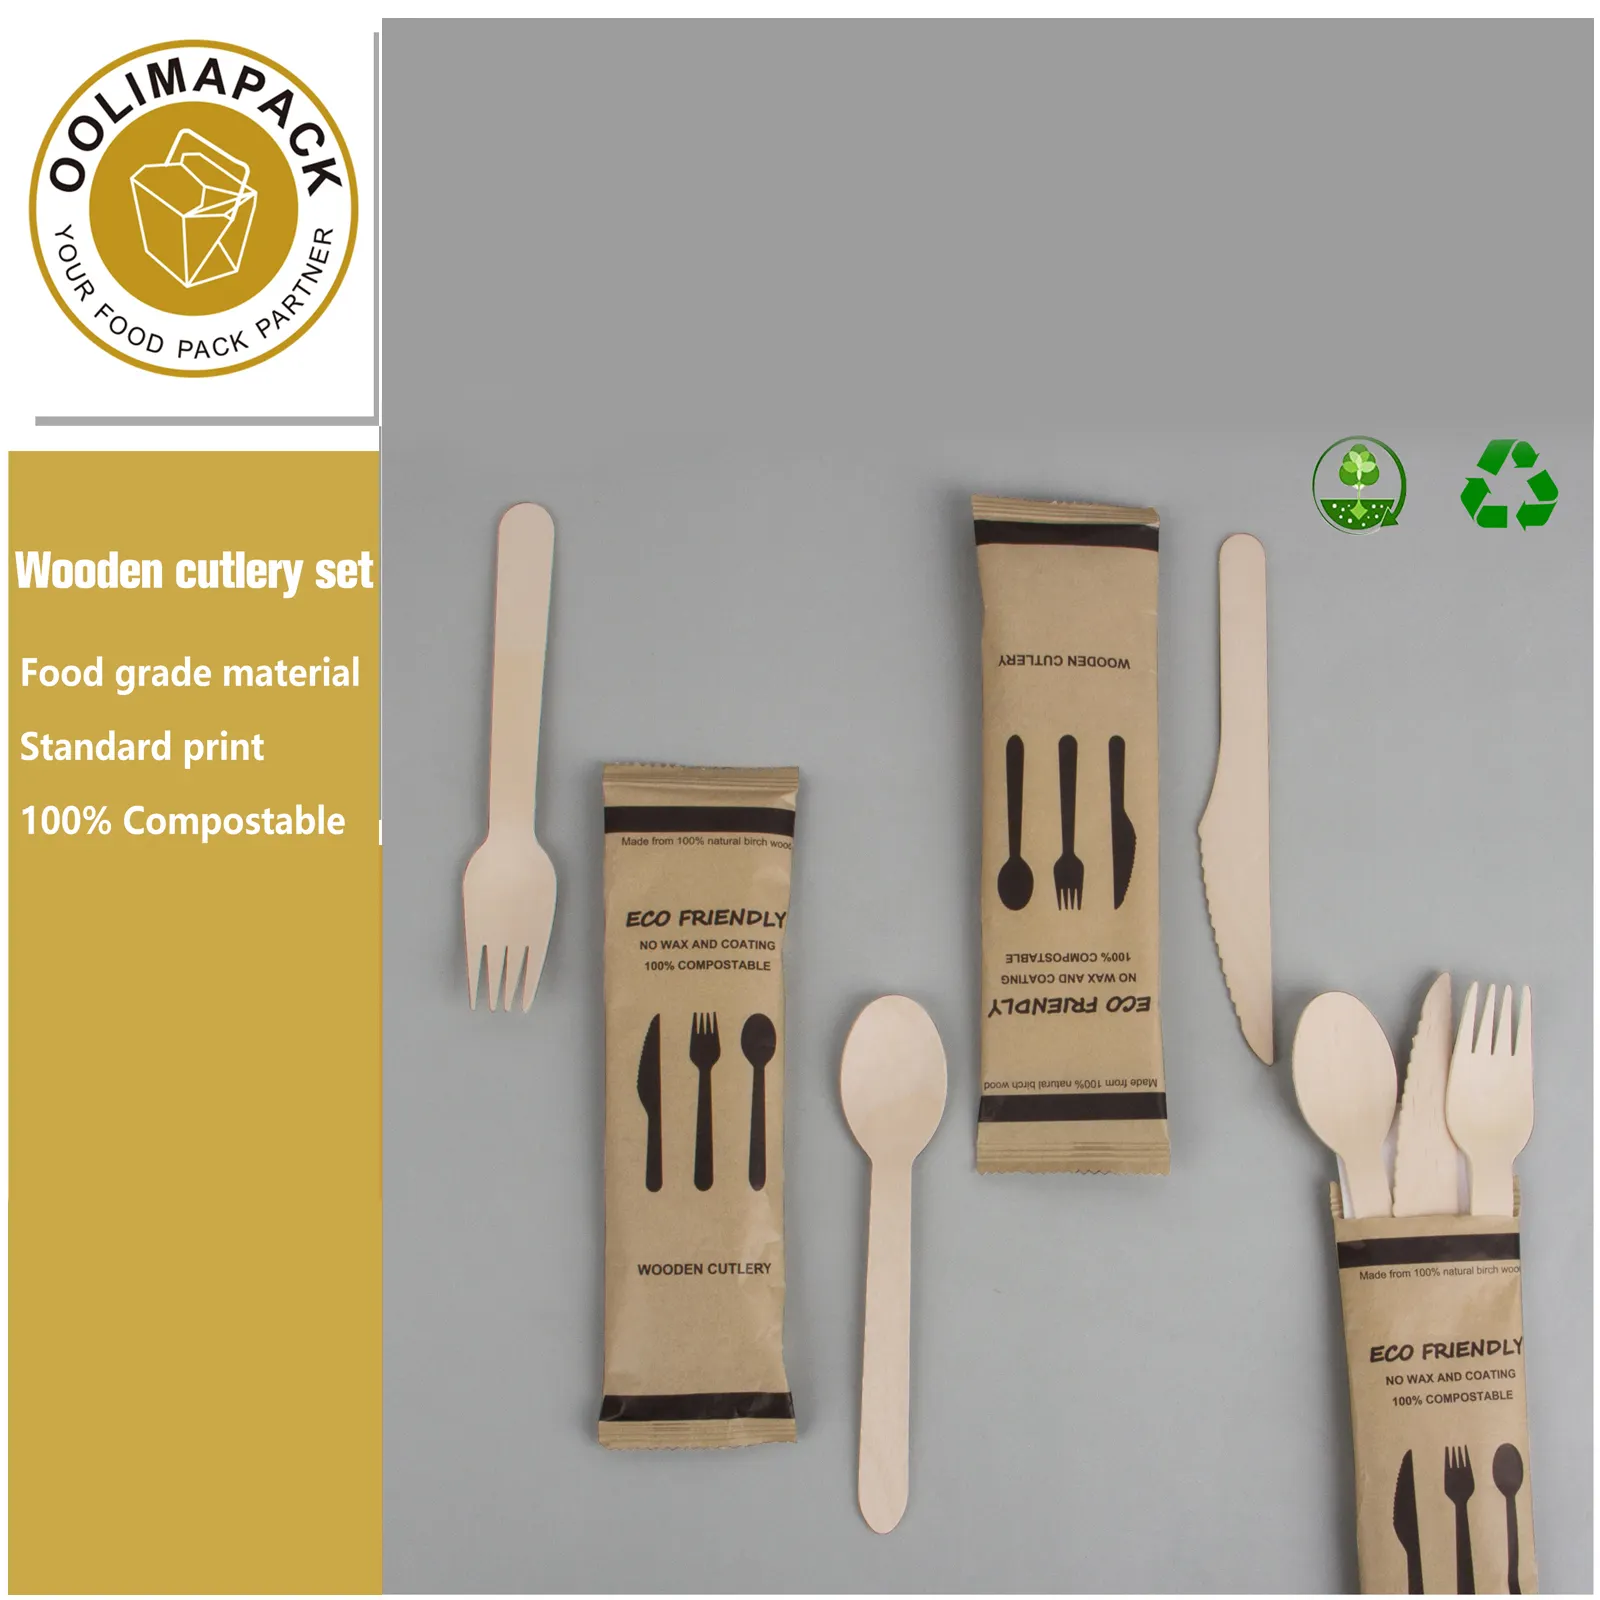 Disposable packing mini cutlery set wooden wooden fork /knife and paper napkin set